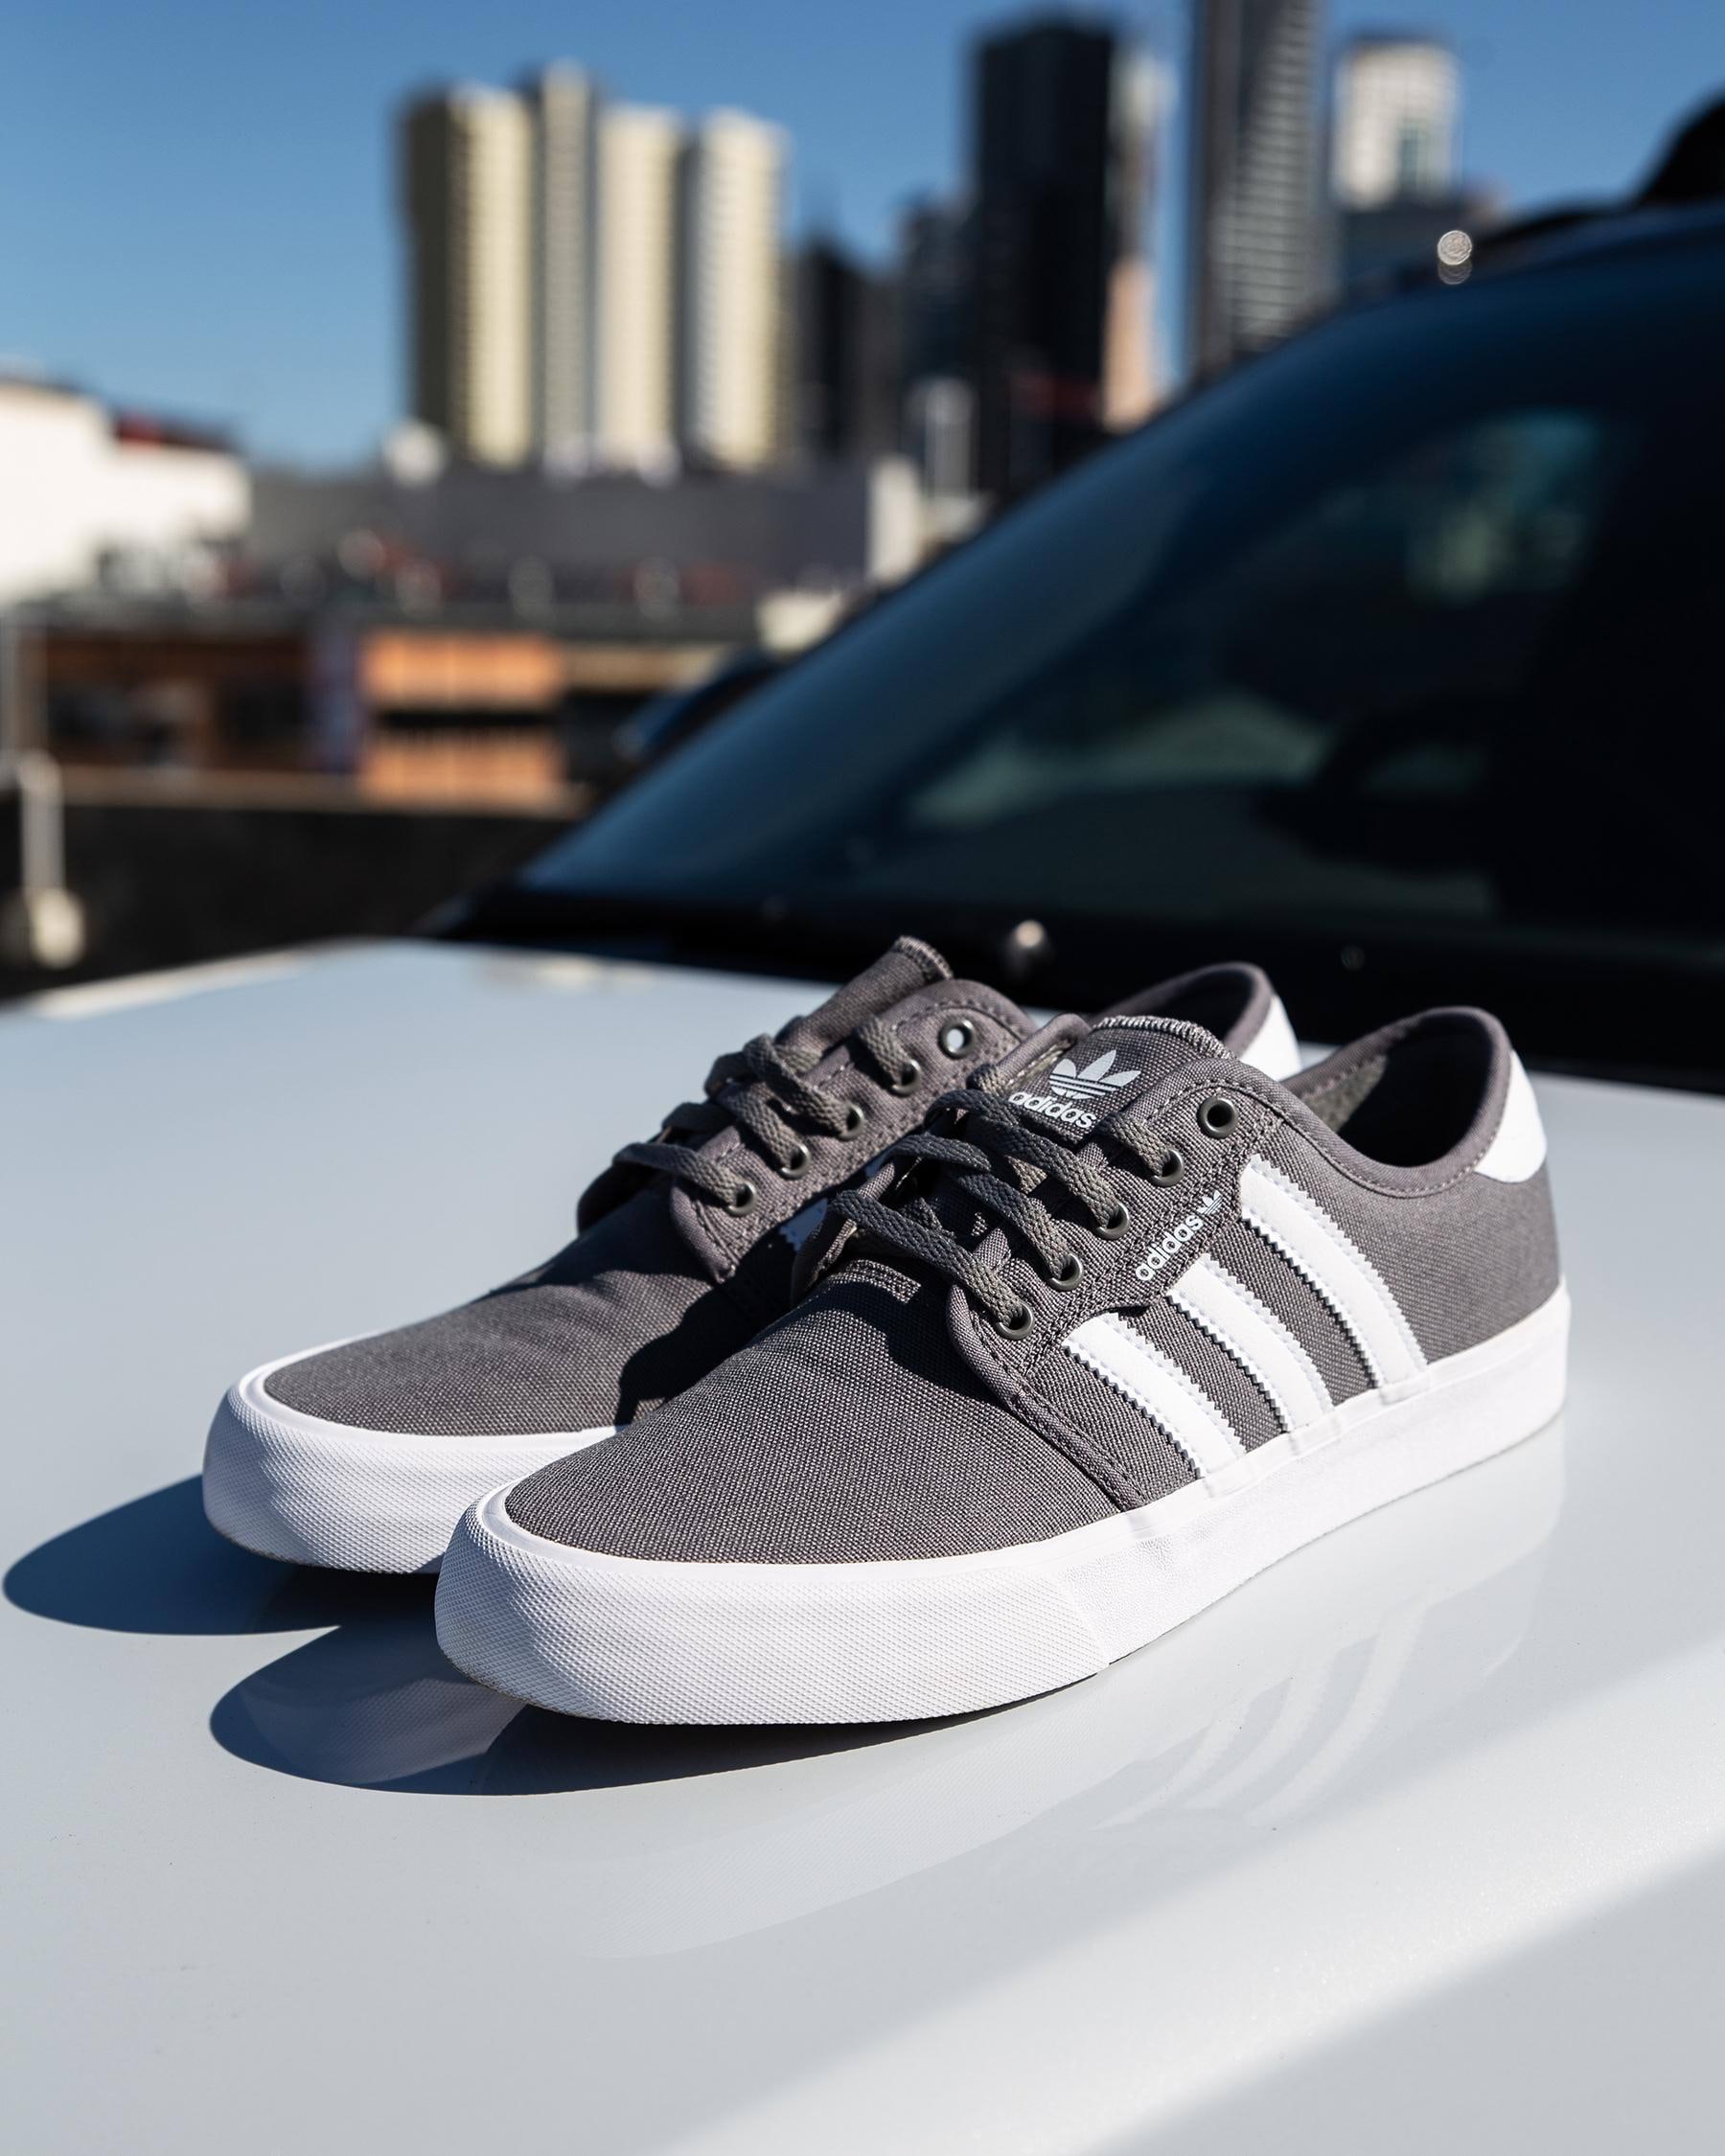 Adidas Seeley XT Shoes In Grey/white - FREE* Shipping & Easy Returns - City  Beach United States | Sneaker low